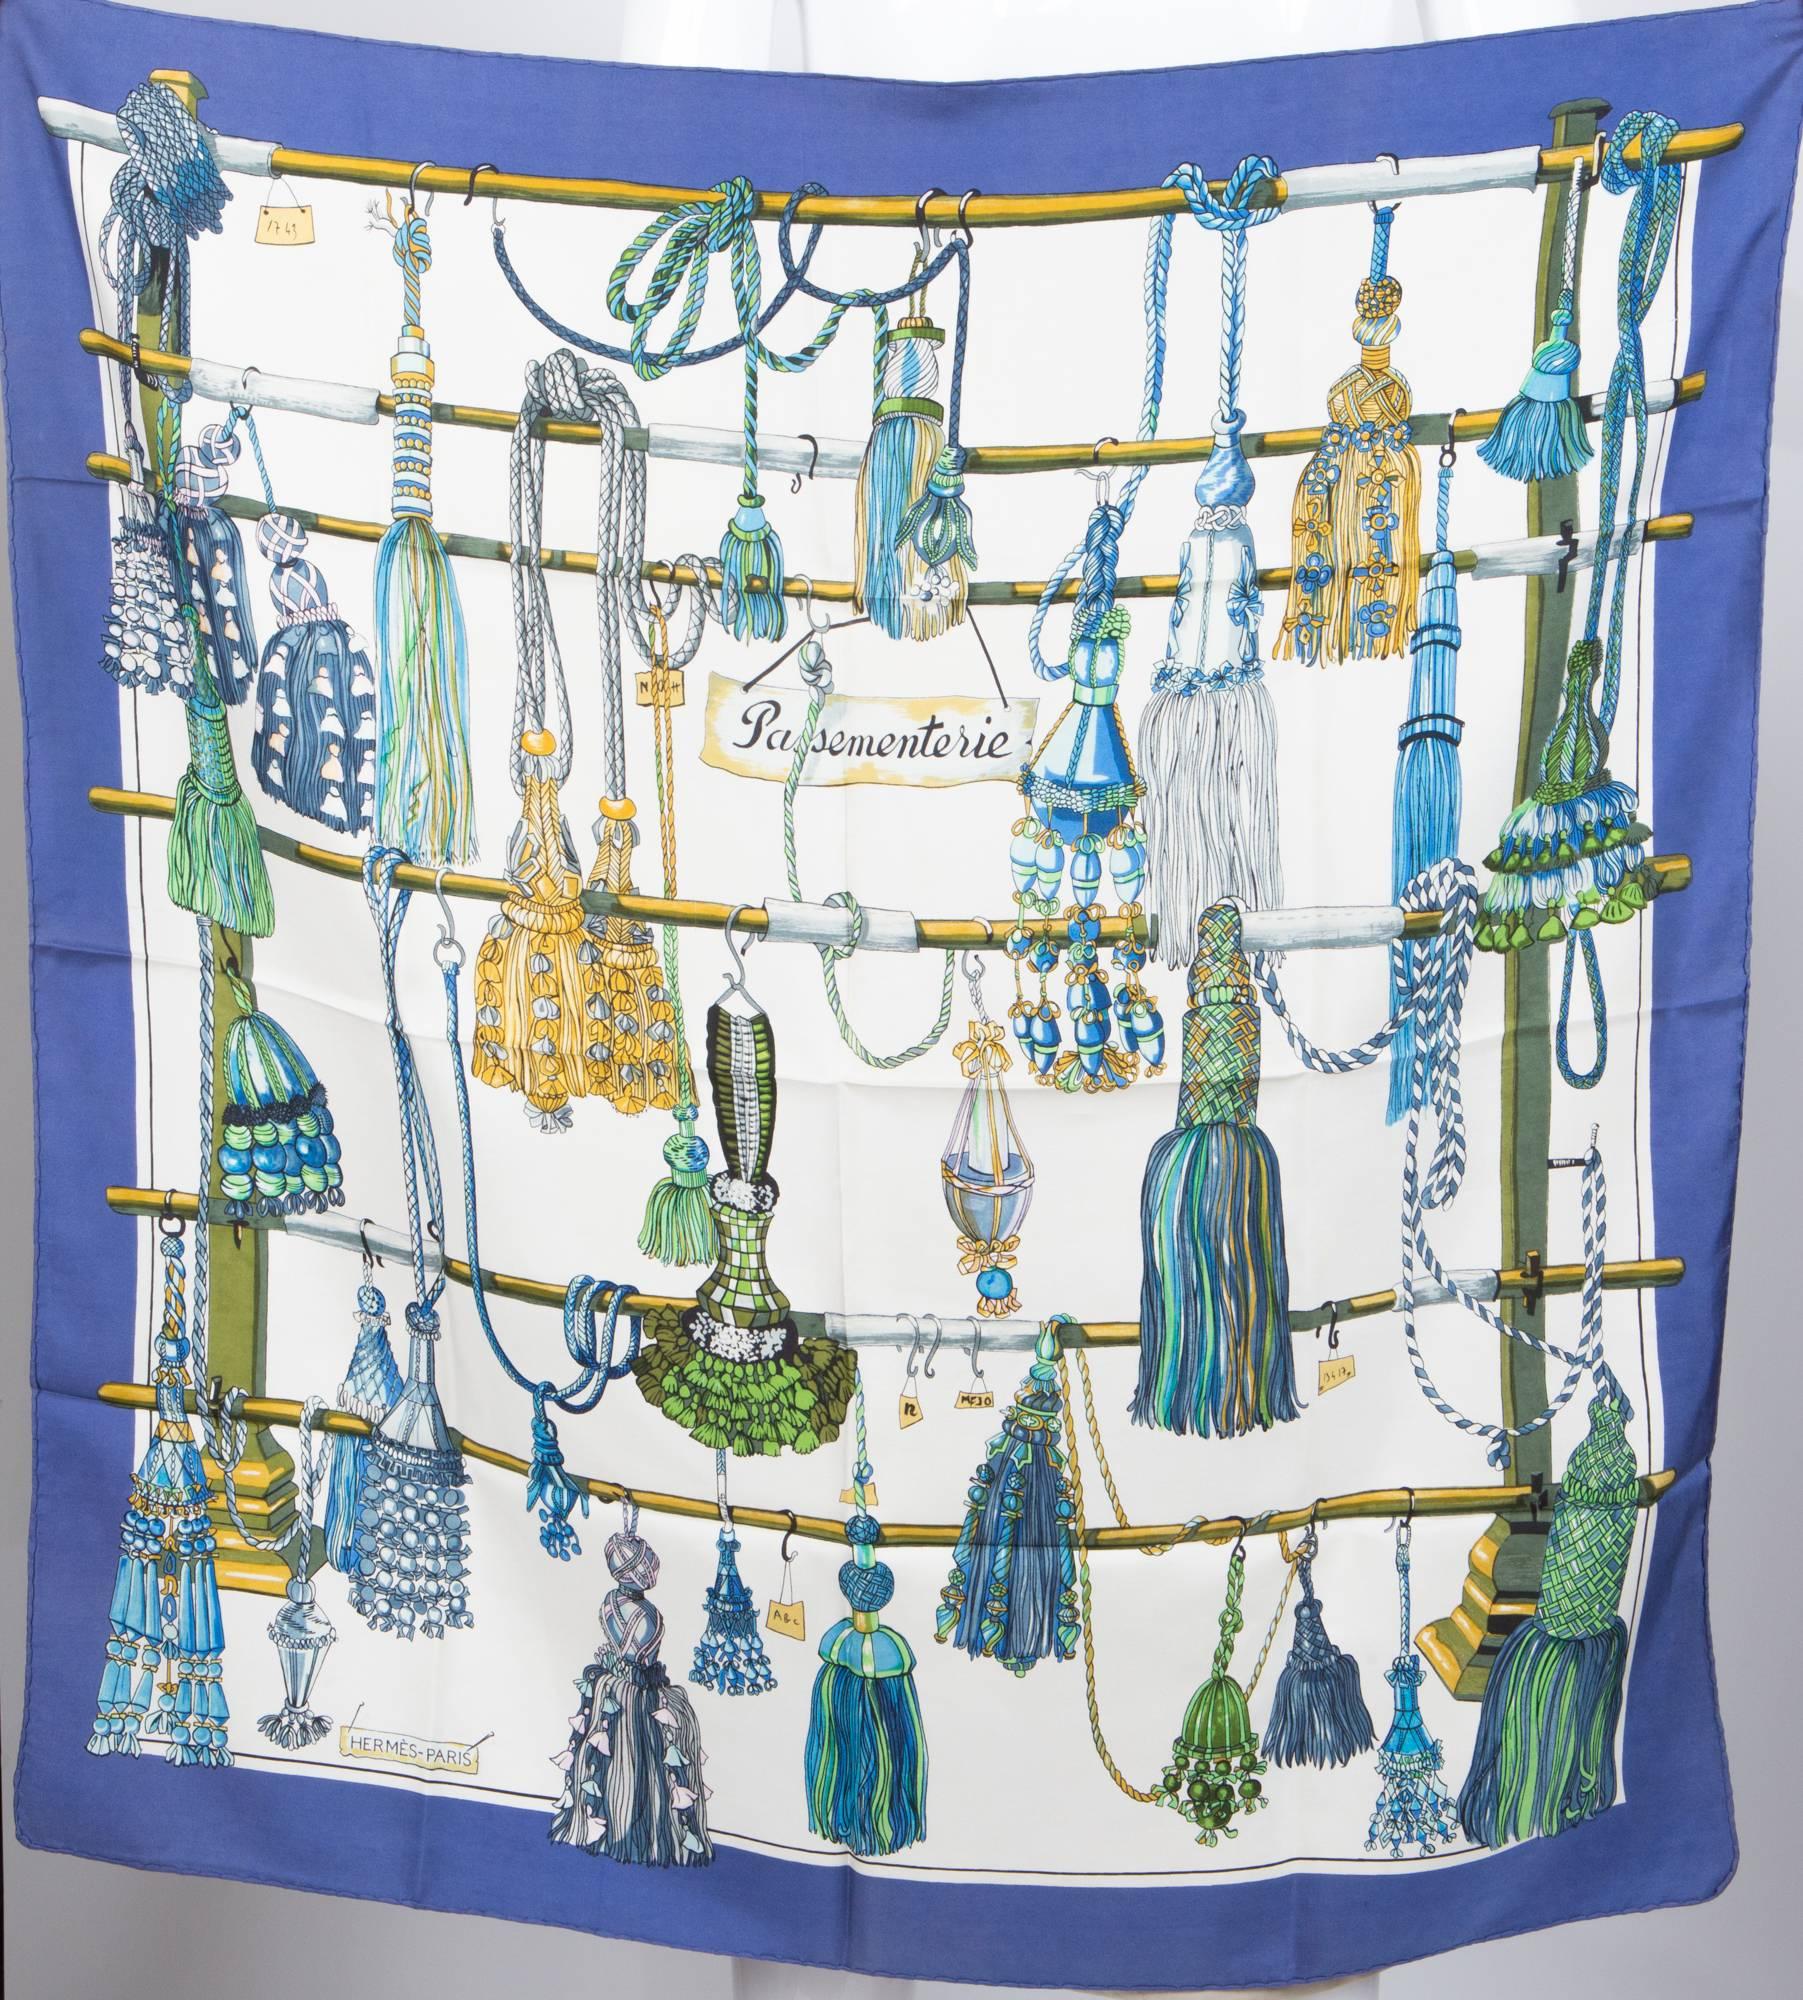 Rare blue gorgeous Passementerie Hermes Scarf featuring blue & amp, green tassels, hand rolled hem.Passementerie was designed by Francoise Heron and first issued in 1960, At the beginning of the 1960s, Robert Dumas, then president of Hermès, was